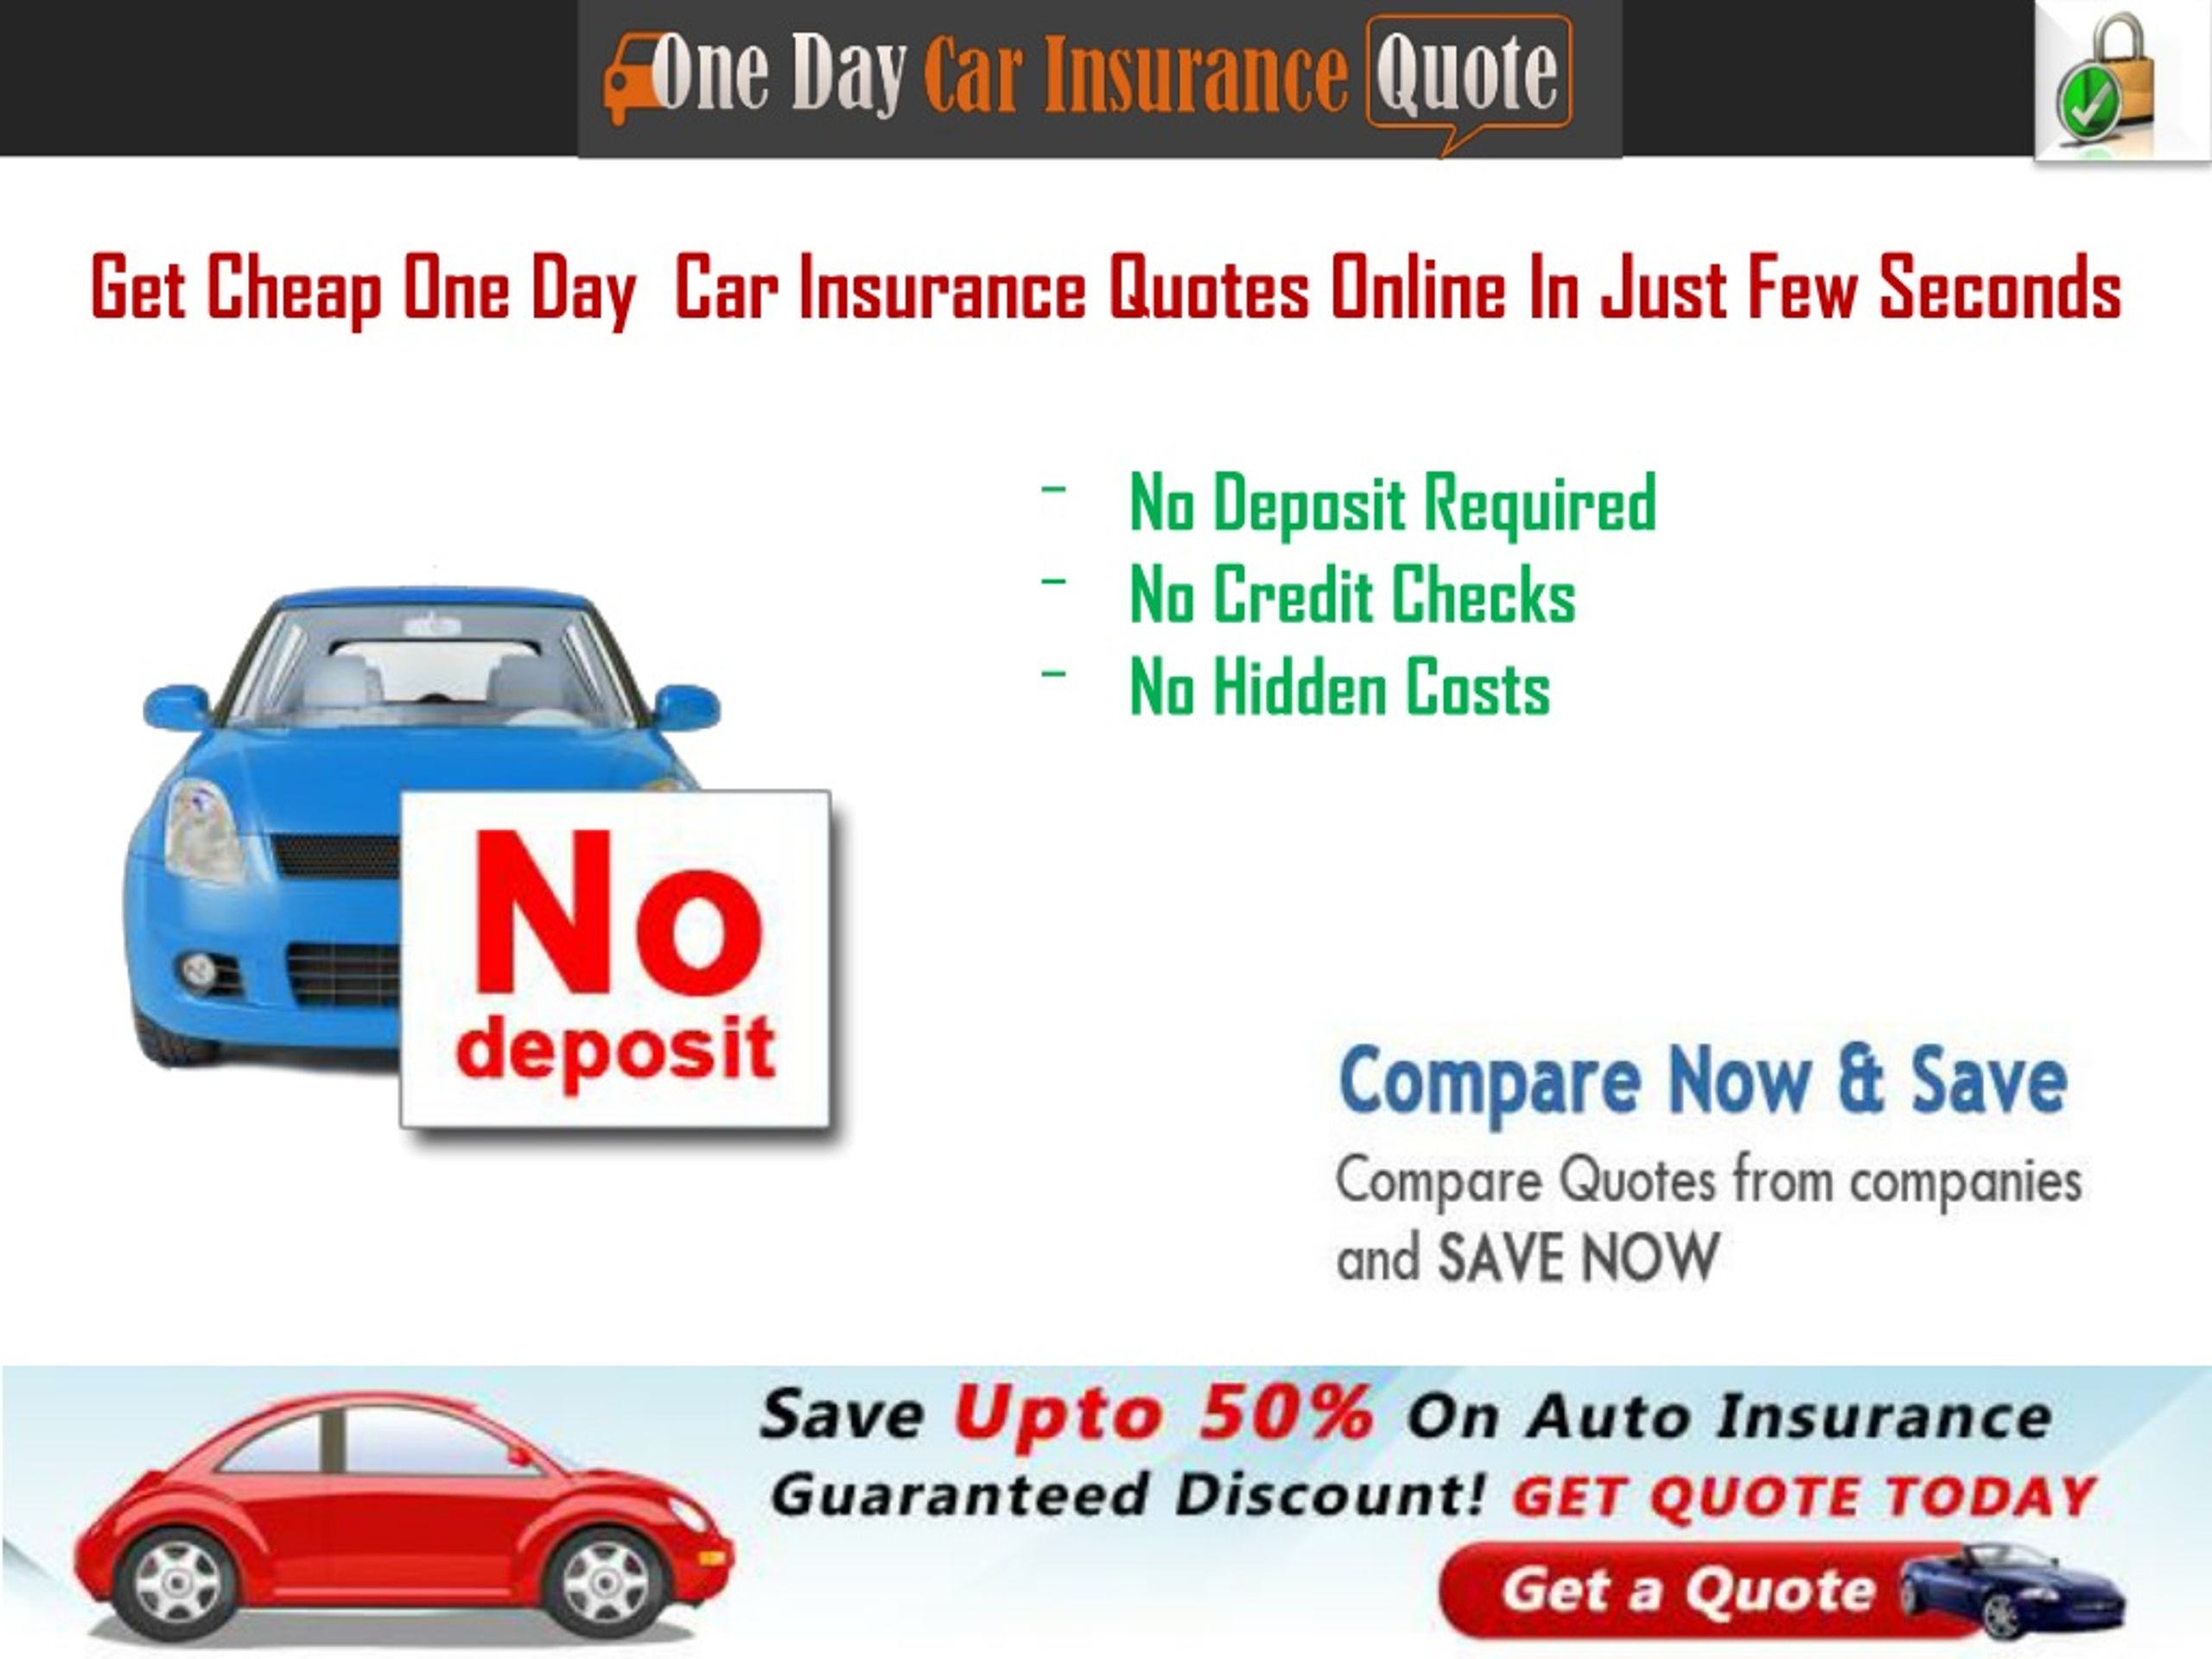 PPT Get Cheap One Day Car Insurance Quotes With No